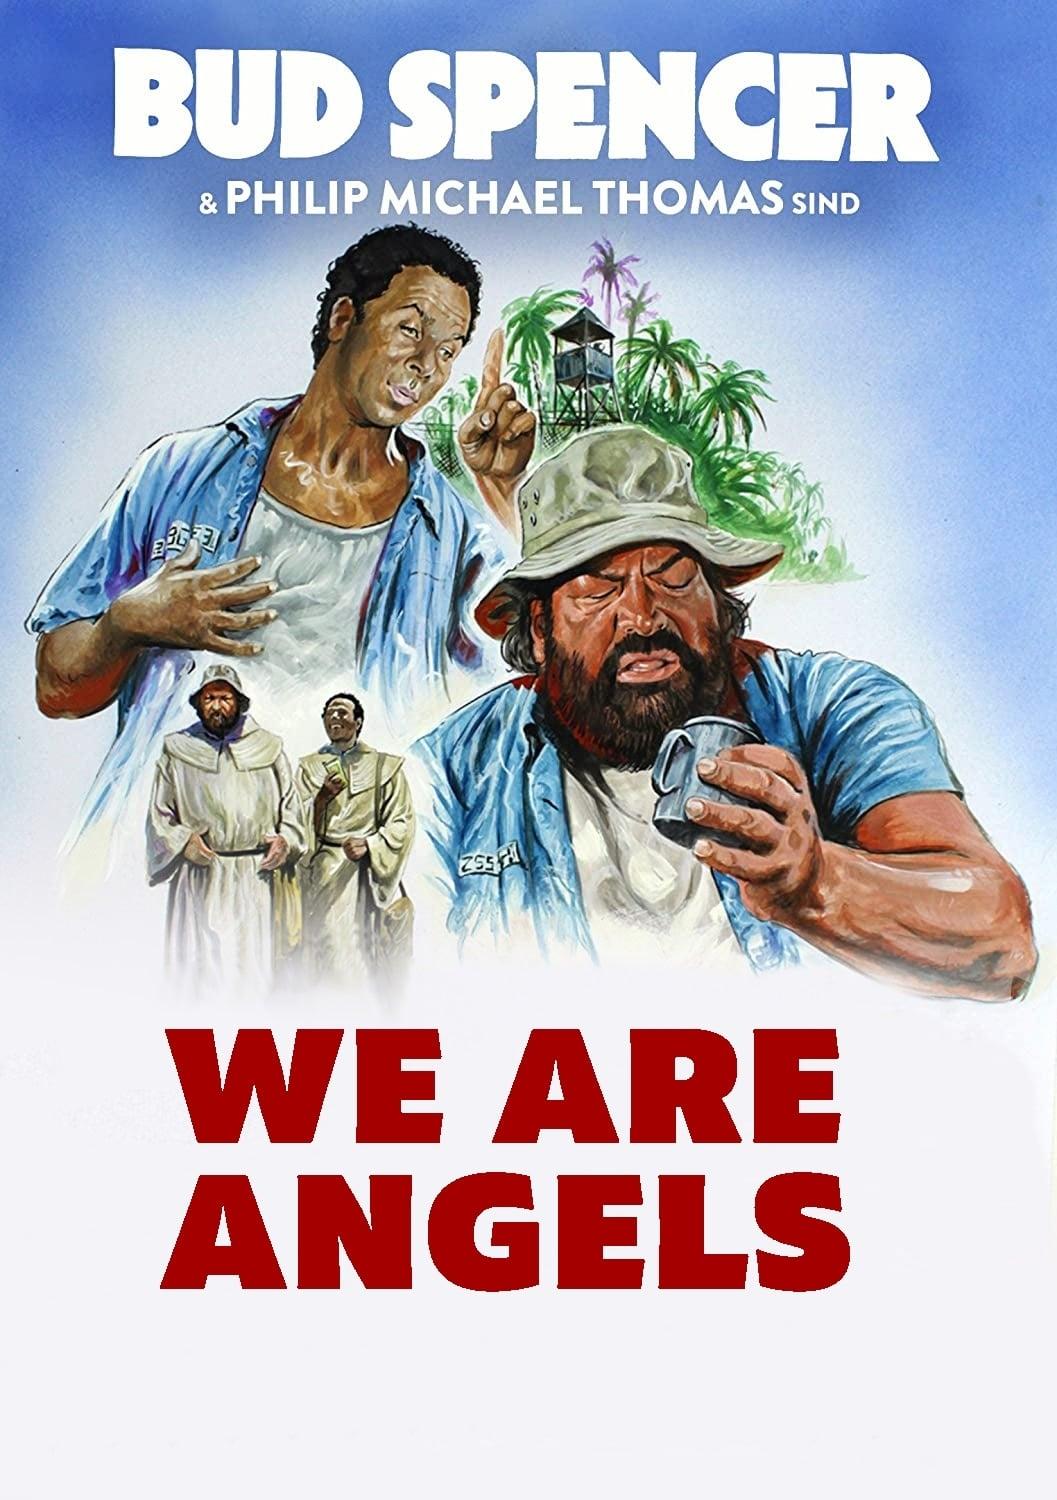 We Are Angels poster